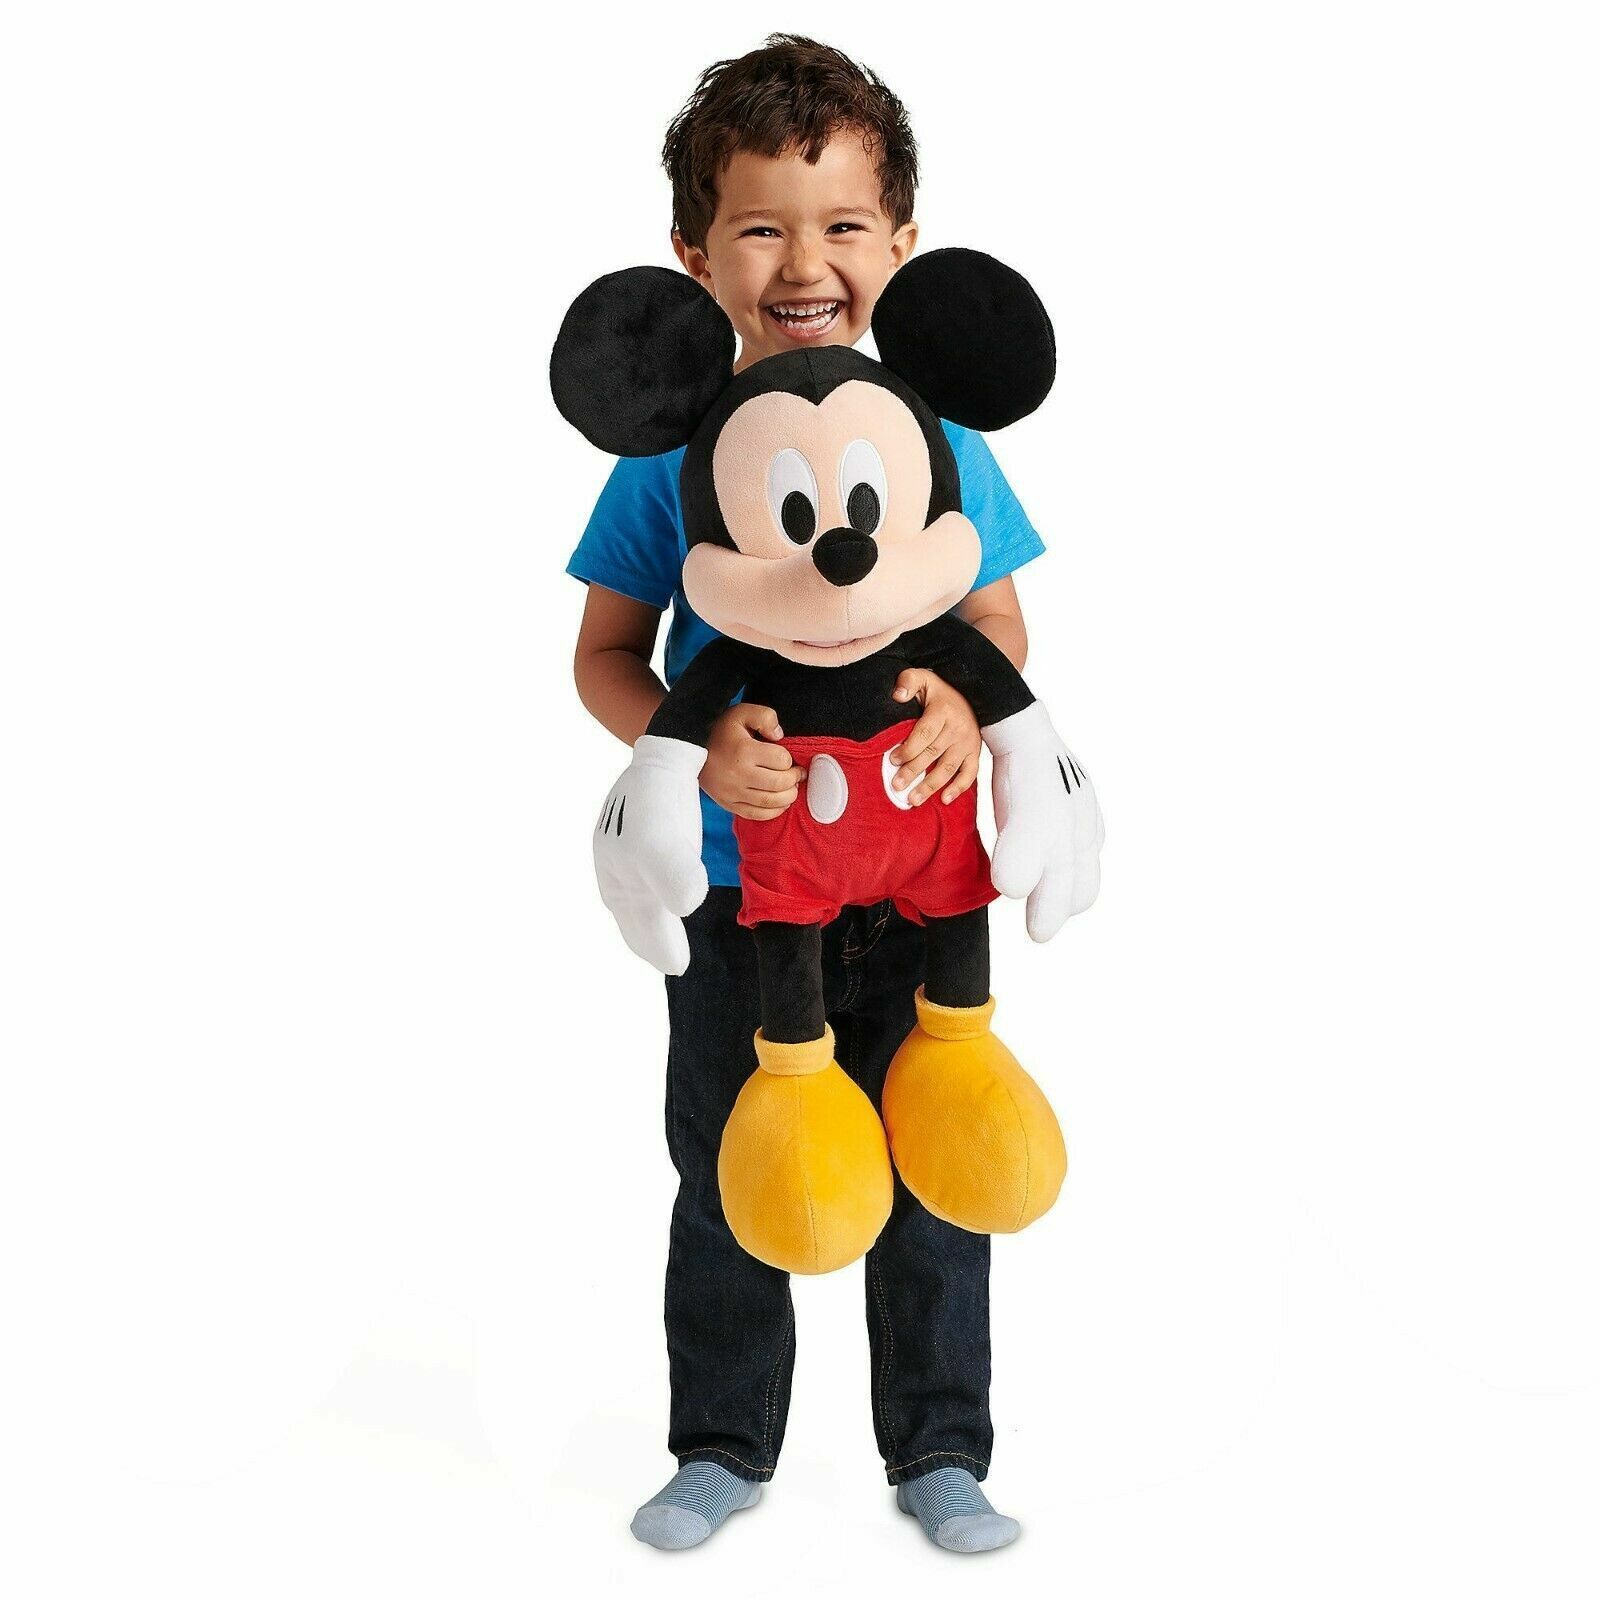 DISNEY MICKEY MOUSE LARGE PLUSH  NEW DISNEY AUTHENTIC 25 inch Fast SHIPPING 